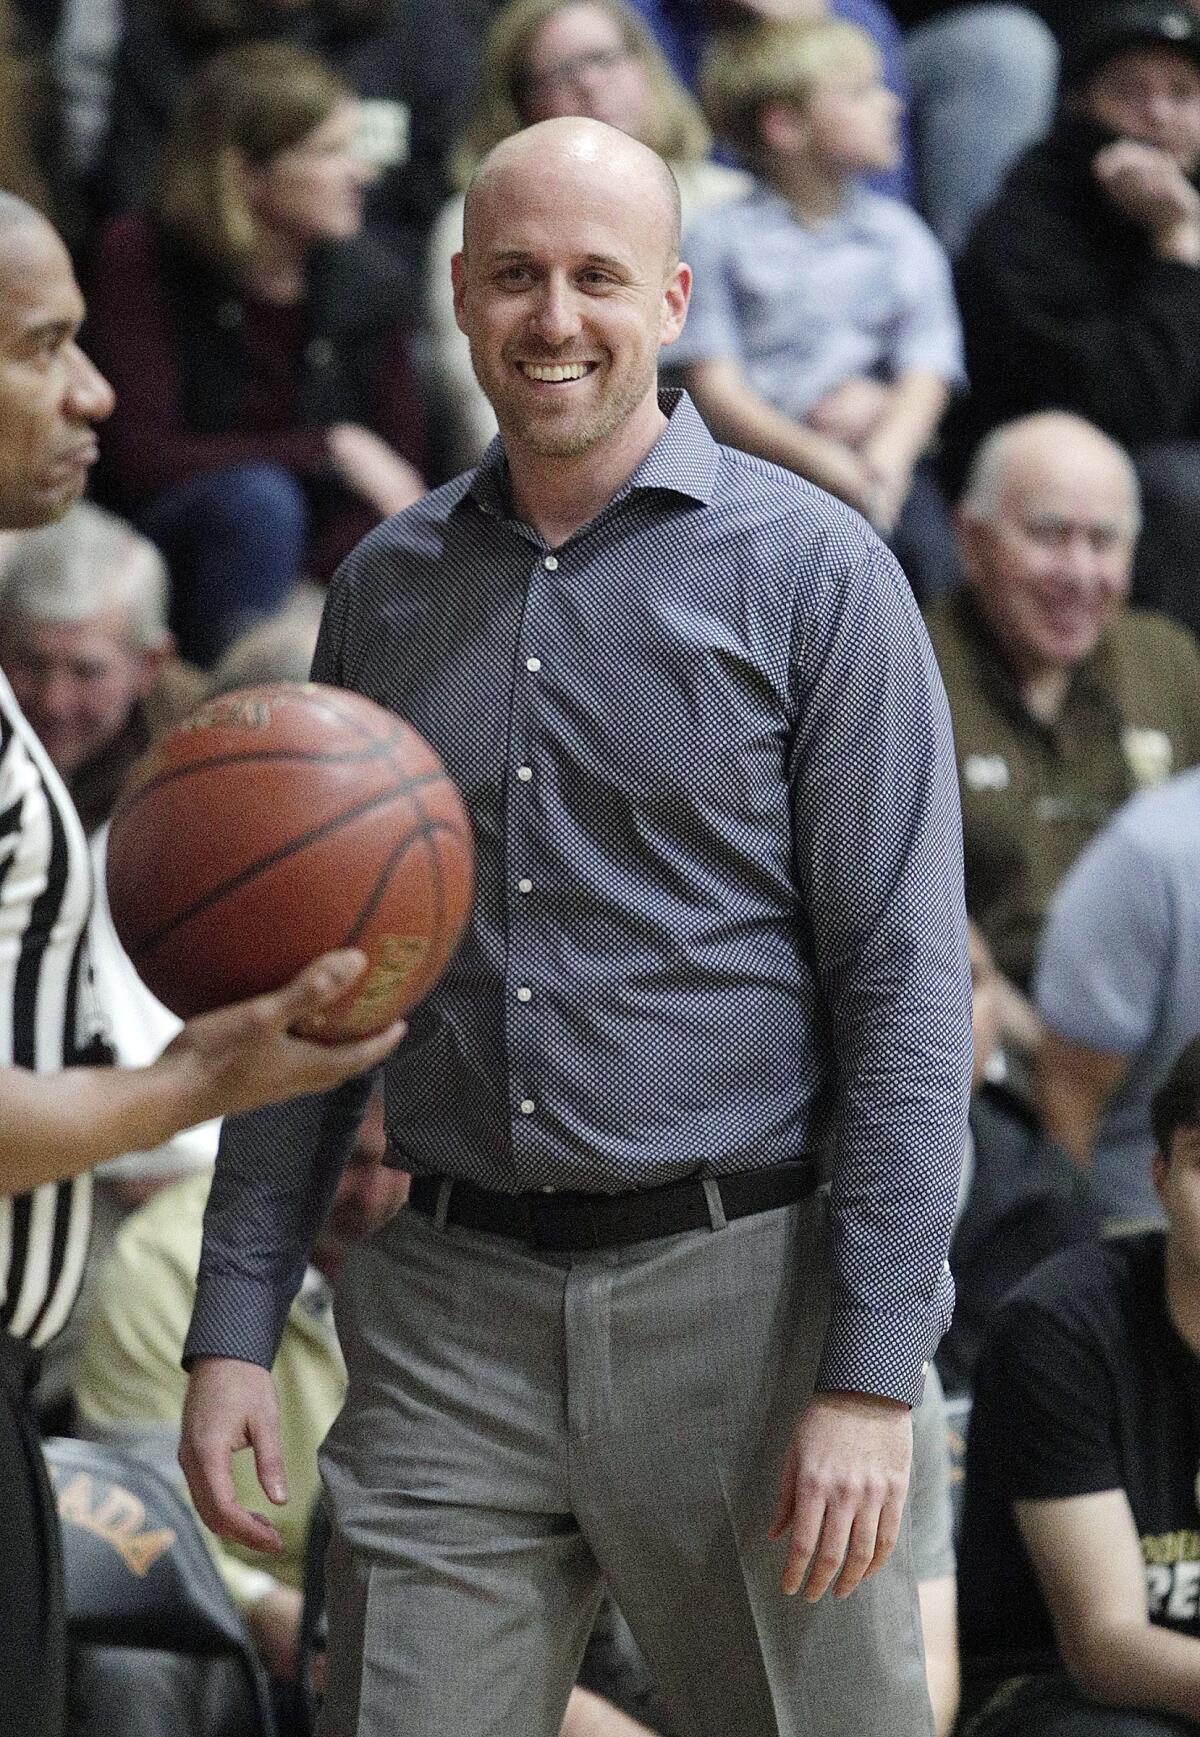 St. Francis' head coach Todd Wolfson smiles at the referee after a no-call in the game with La Canada in CIF Southern Section Division II-A first-round boys' basketball playoff at La Canada High School on Wednesday, February 12, 2020.